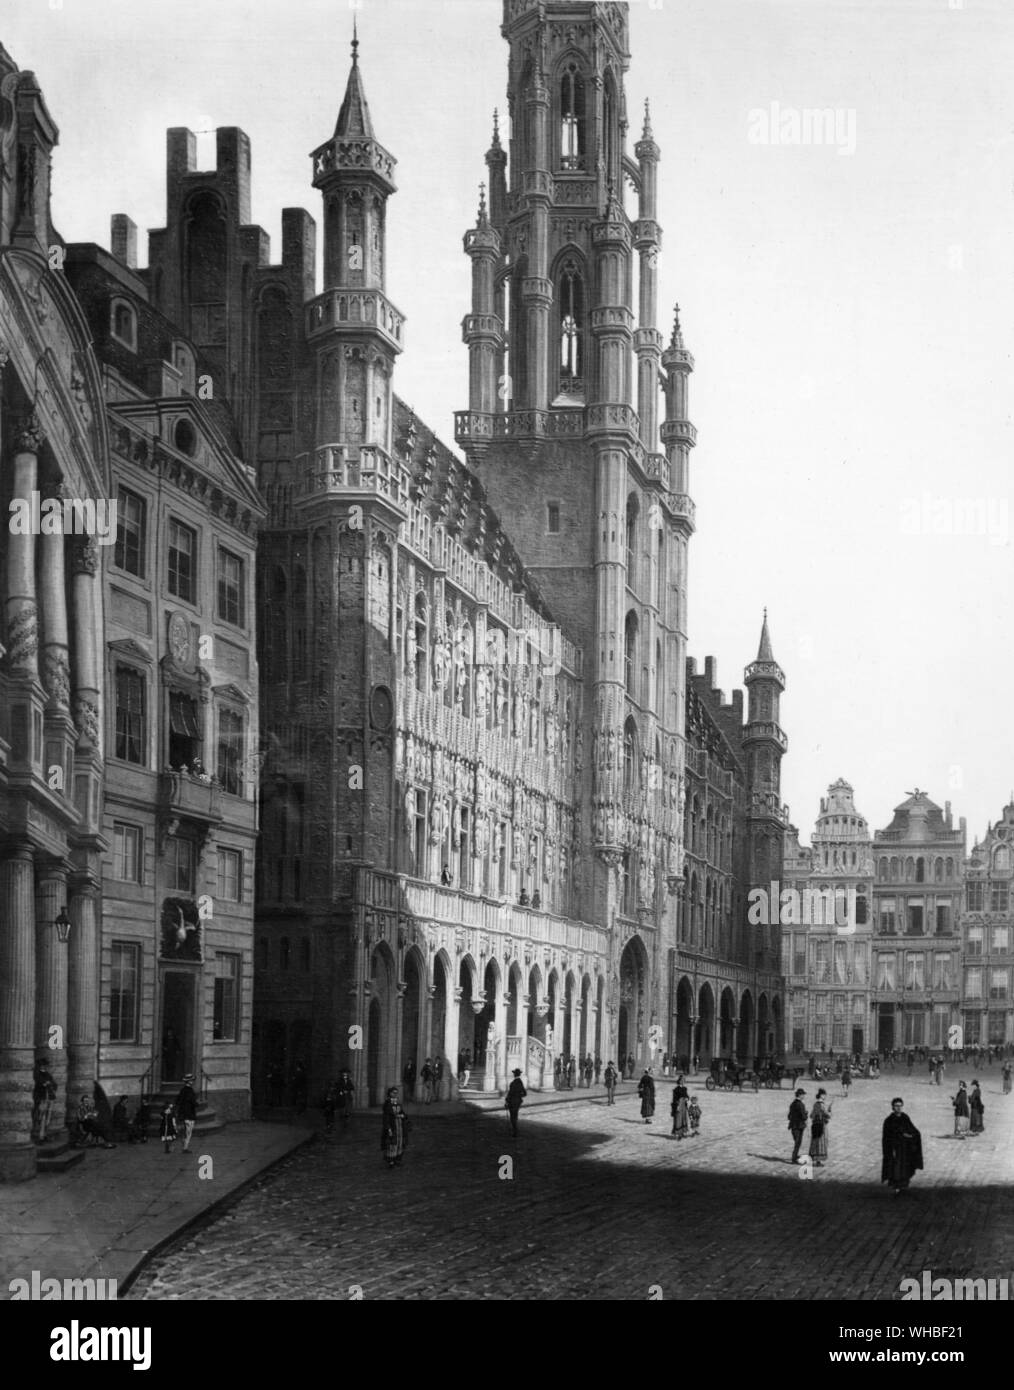 Hotel de Ville, Brussels also showing figures and horse-drawn vehicles in front of the building. Stock Photo